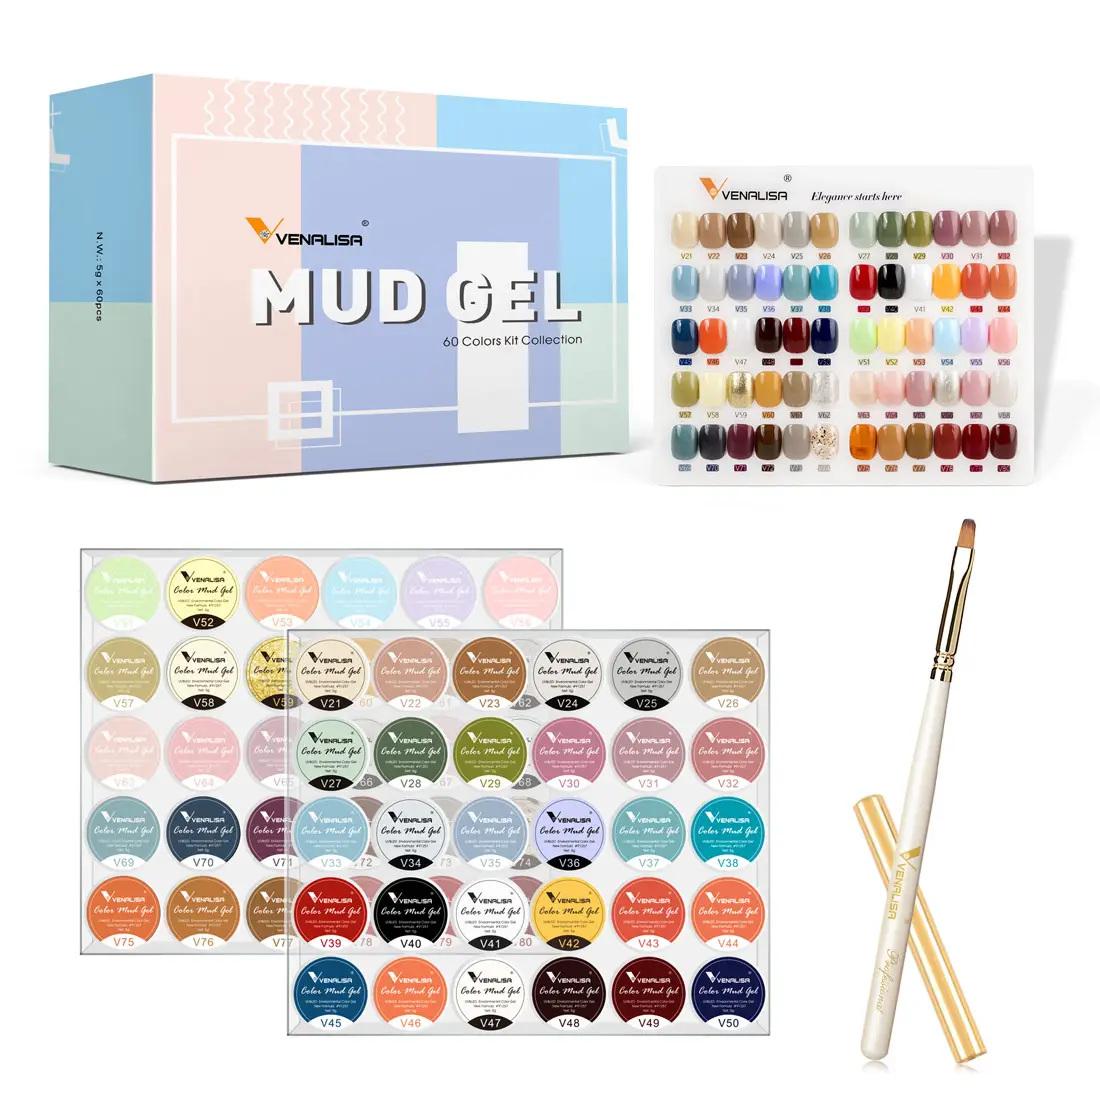 Venalisa Professional Odorless 60 Colors Mud Painting Gel Kit 5ml Not Flowing Color Gel Varnish with Color Chartネイルブラシ